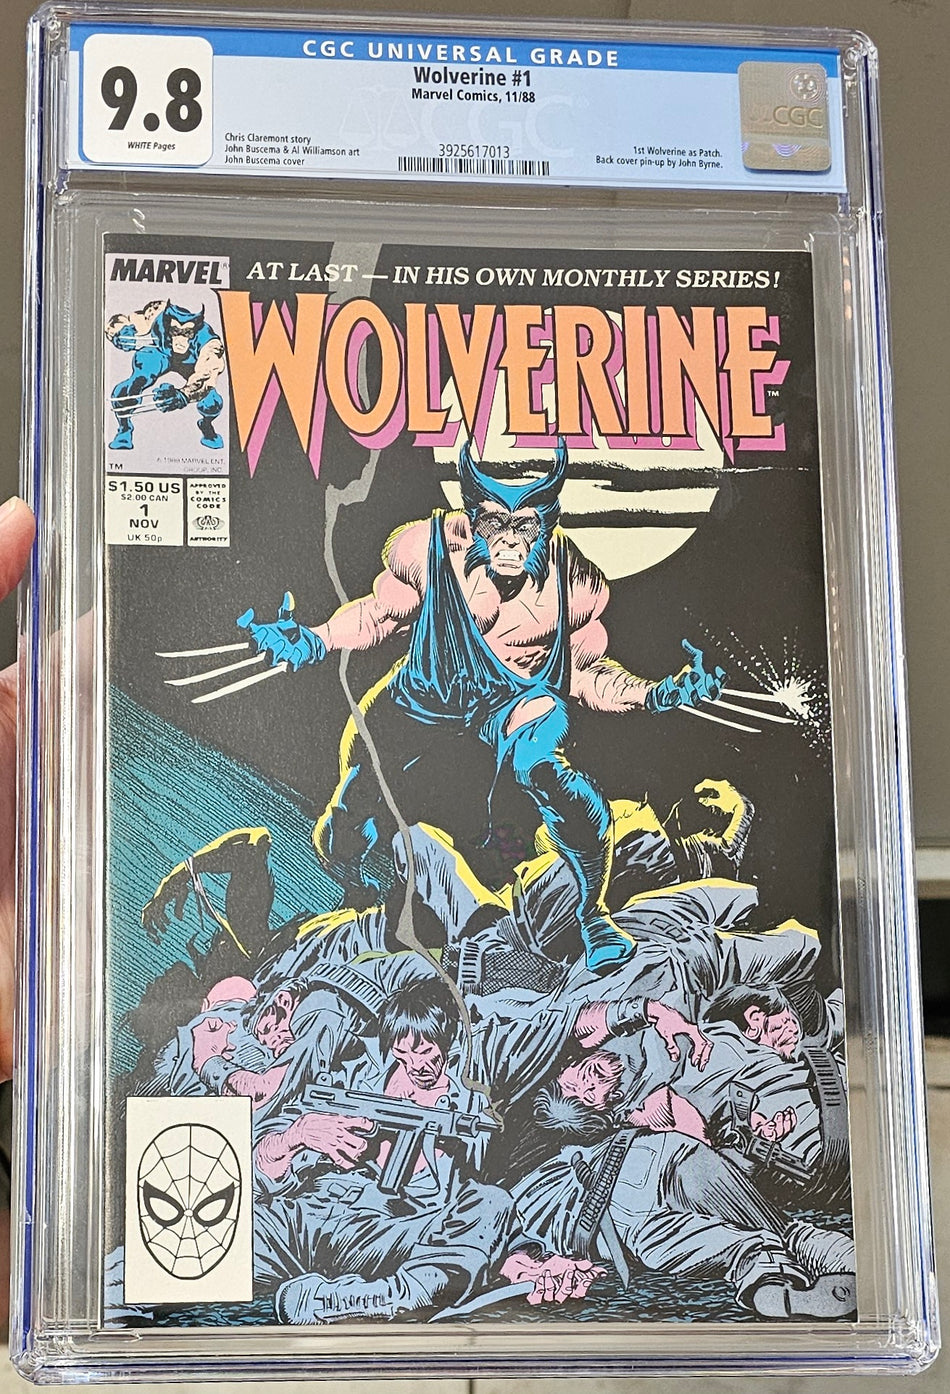 Wolverine #1 CGC 9.8 (1st Wolverine as Patch)